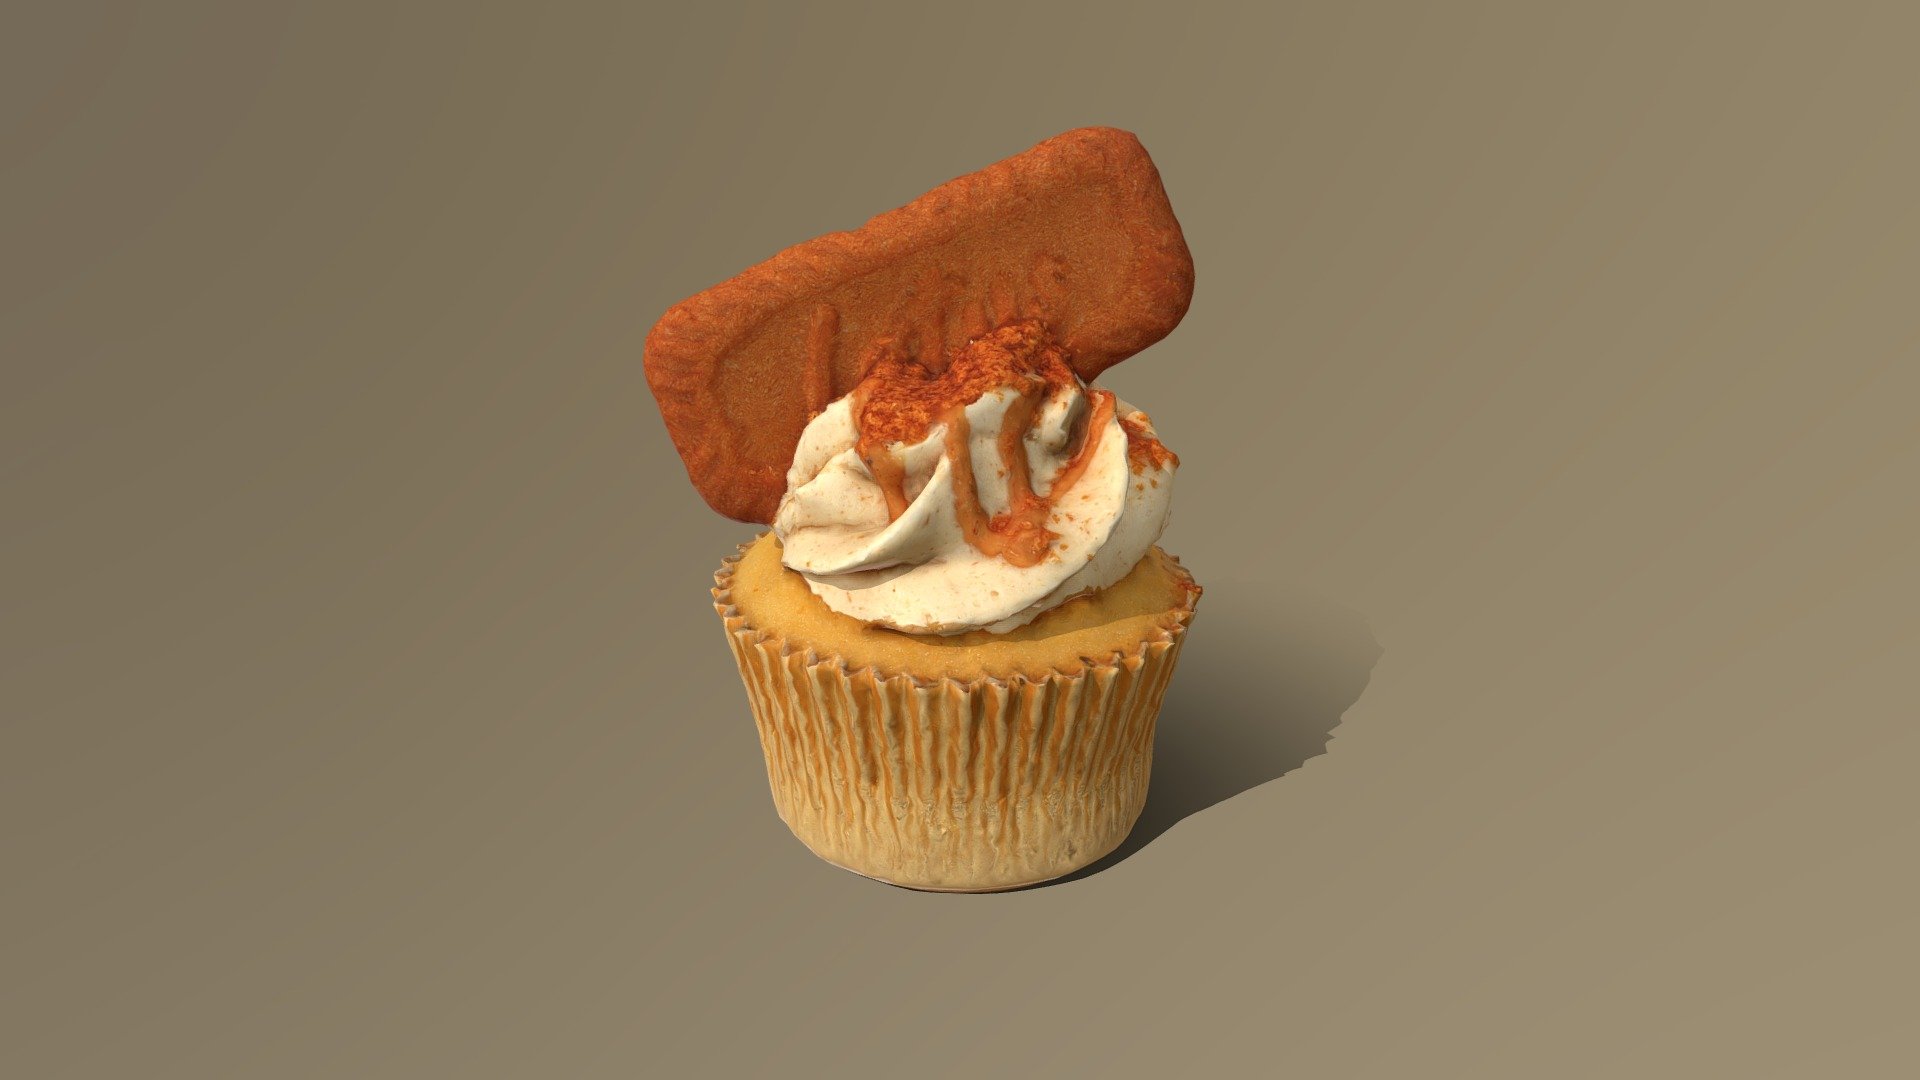 This Lotus Biscoff Caramel Biscuit Cupcake model was created using photogrammetry which is made by CAKESBURG Premium Cake Shop in the UK. You can purchase real cake from this link: https://cakesburg.co.uk/products/copy-of-premium-berries-cupcake-box?_pos=1&amp;_sid=39c86a35b&amp;_ss=r

Textures 4096*4096px PBR photoscan-based materials Base Color, Normal, Roughness, Specular) - Biscoff Caramel Biscuit Cupcake - Buy Royalty Free 3D model by Cakesburg Premium 3D Cake Shop (@Viscom_Cakesburg) 3d model